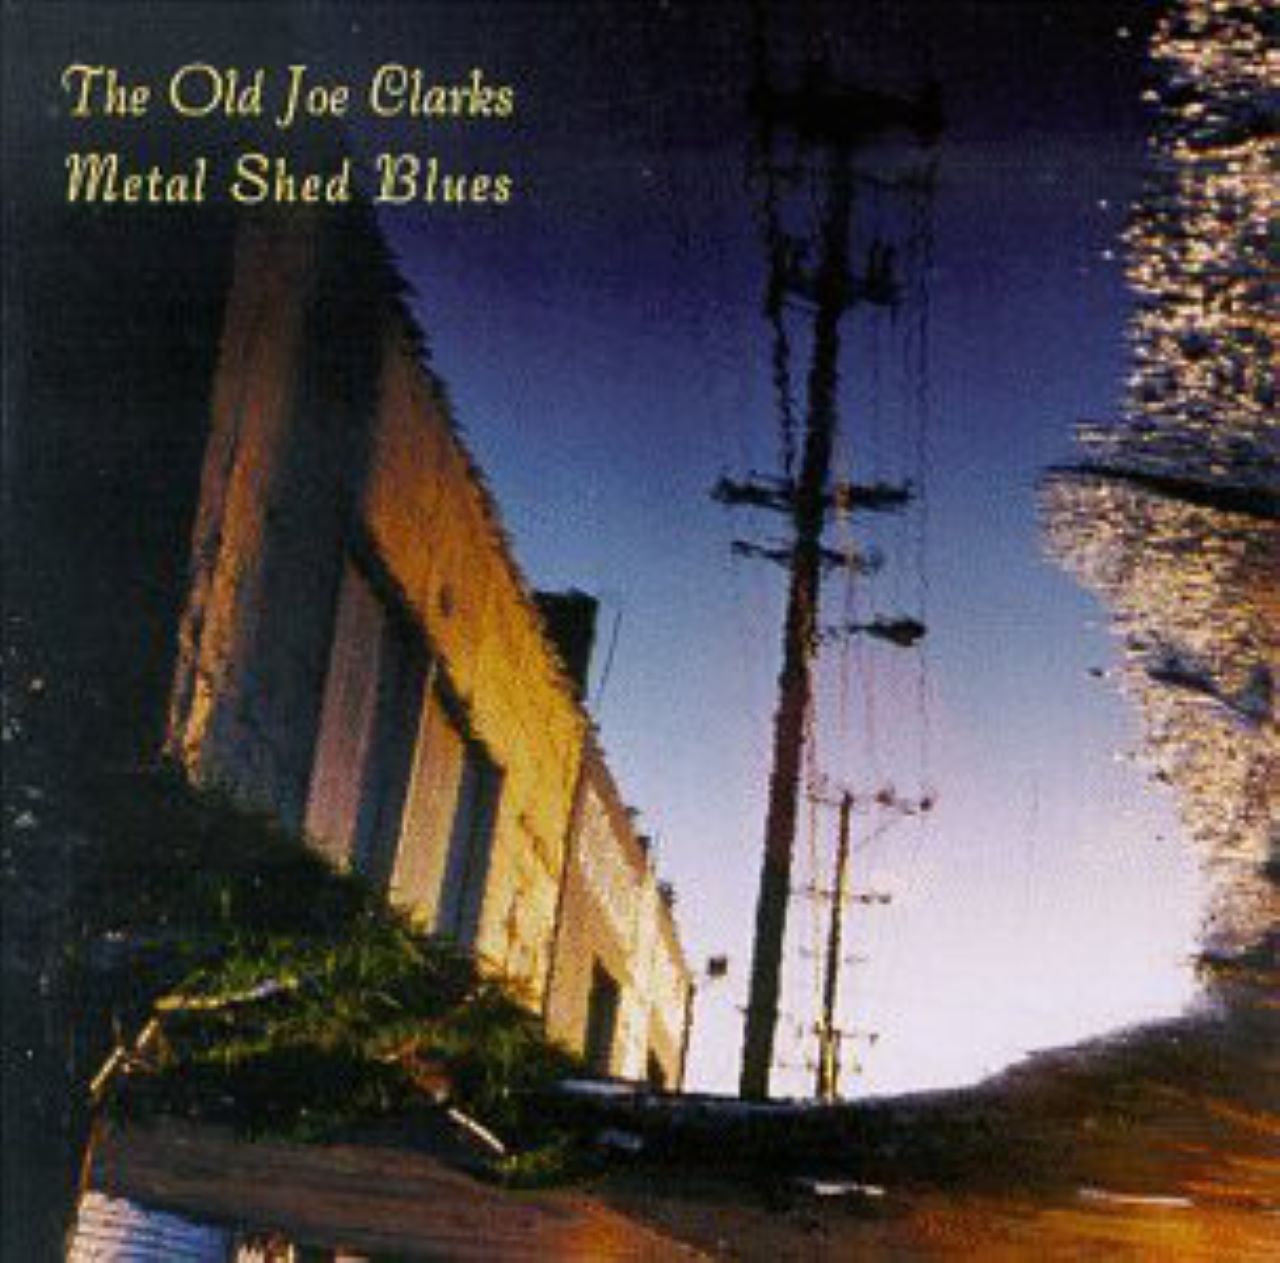 Old Joe Clarks - Metal Shed Blues cover album